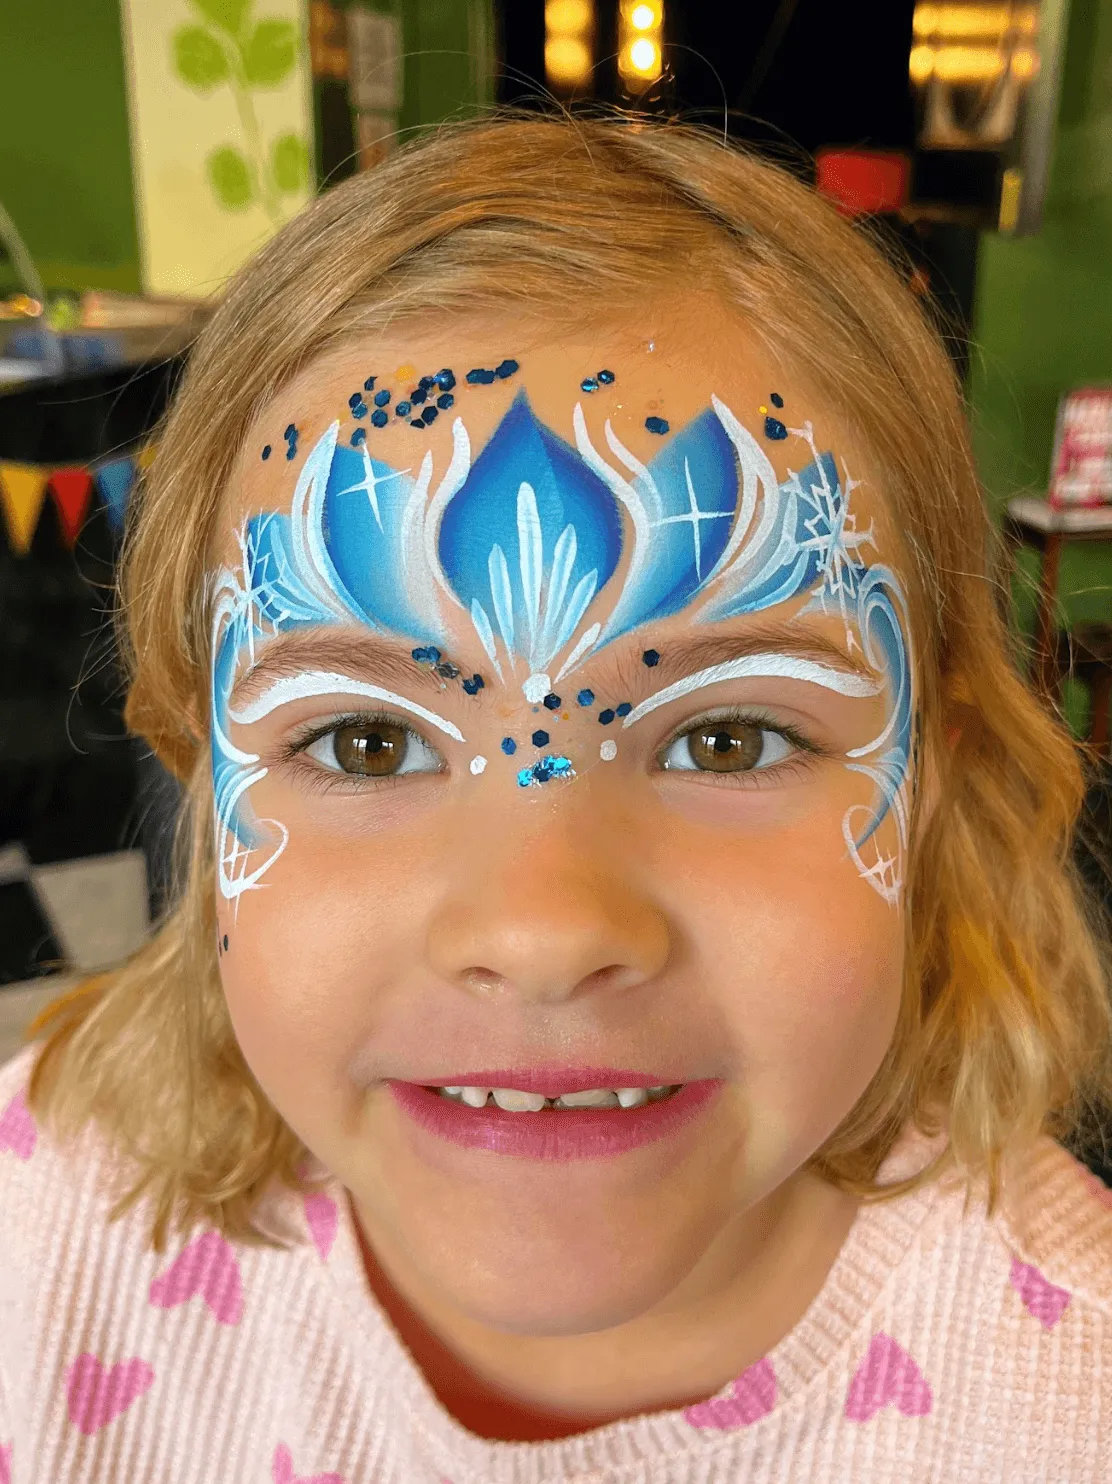 A kid proudly displaying an amazing facepaint artwork